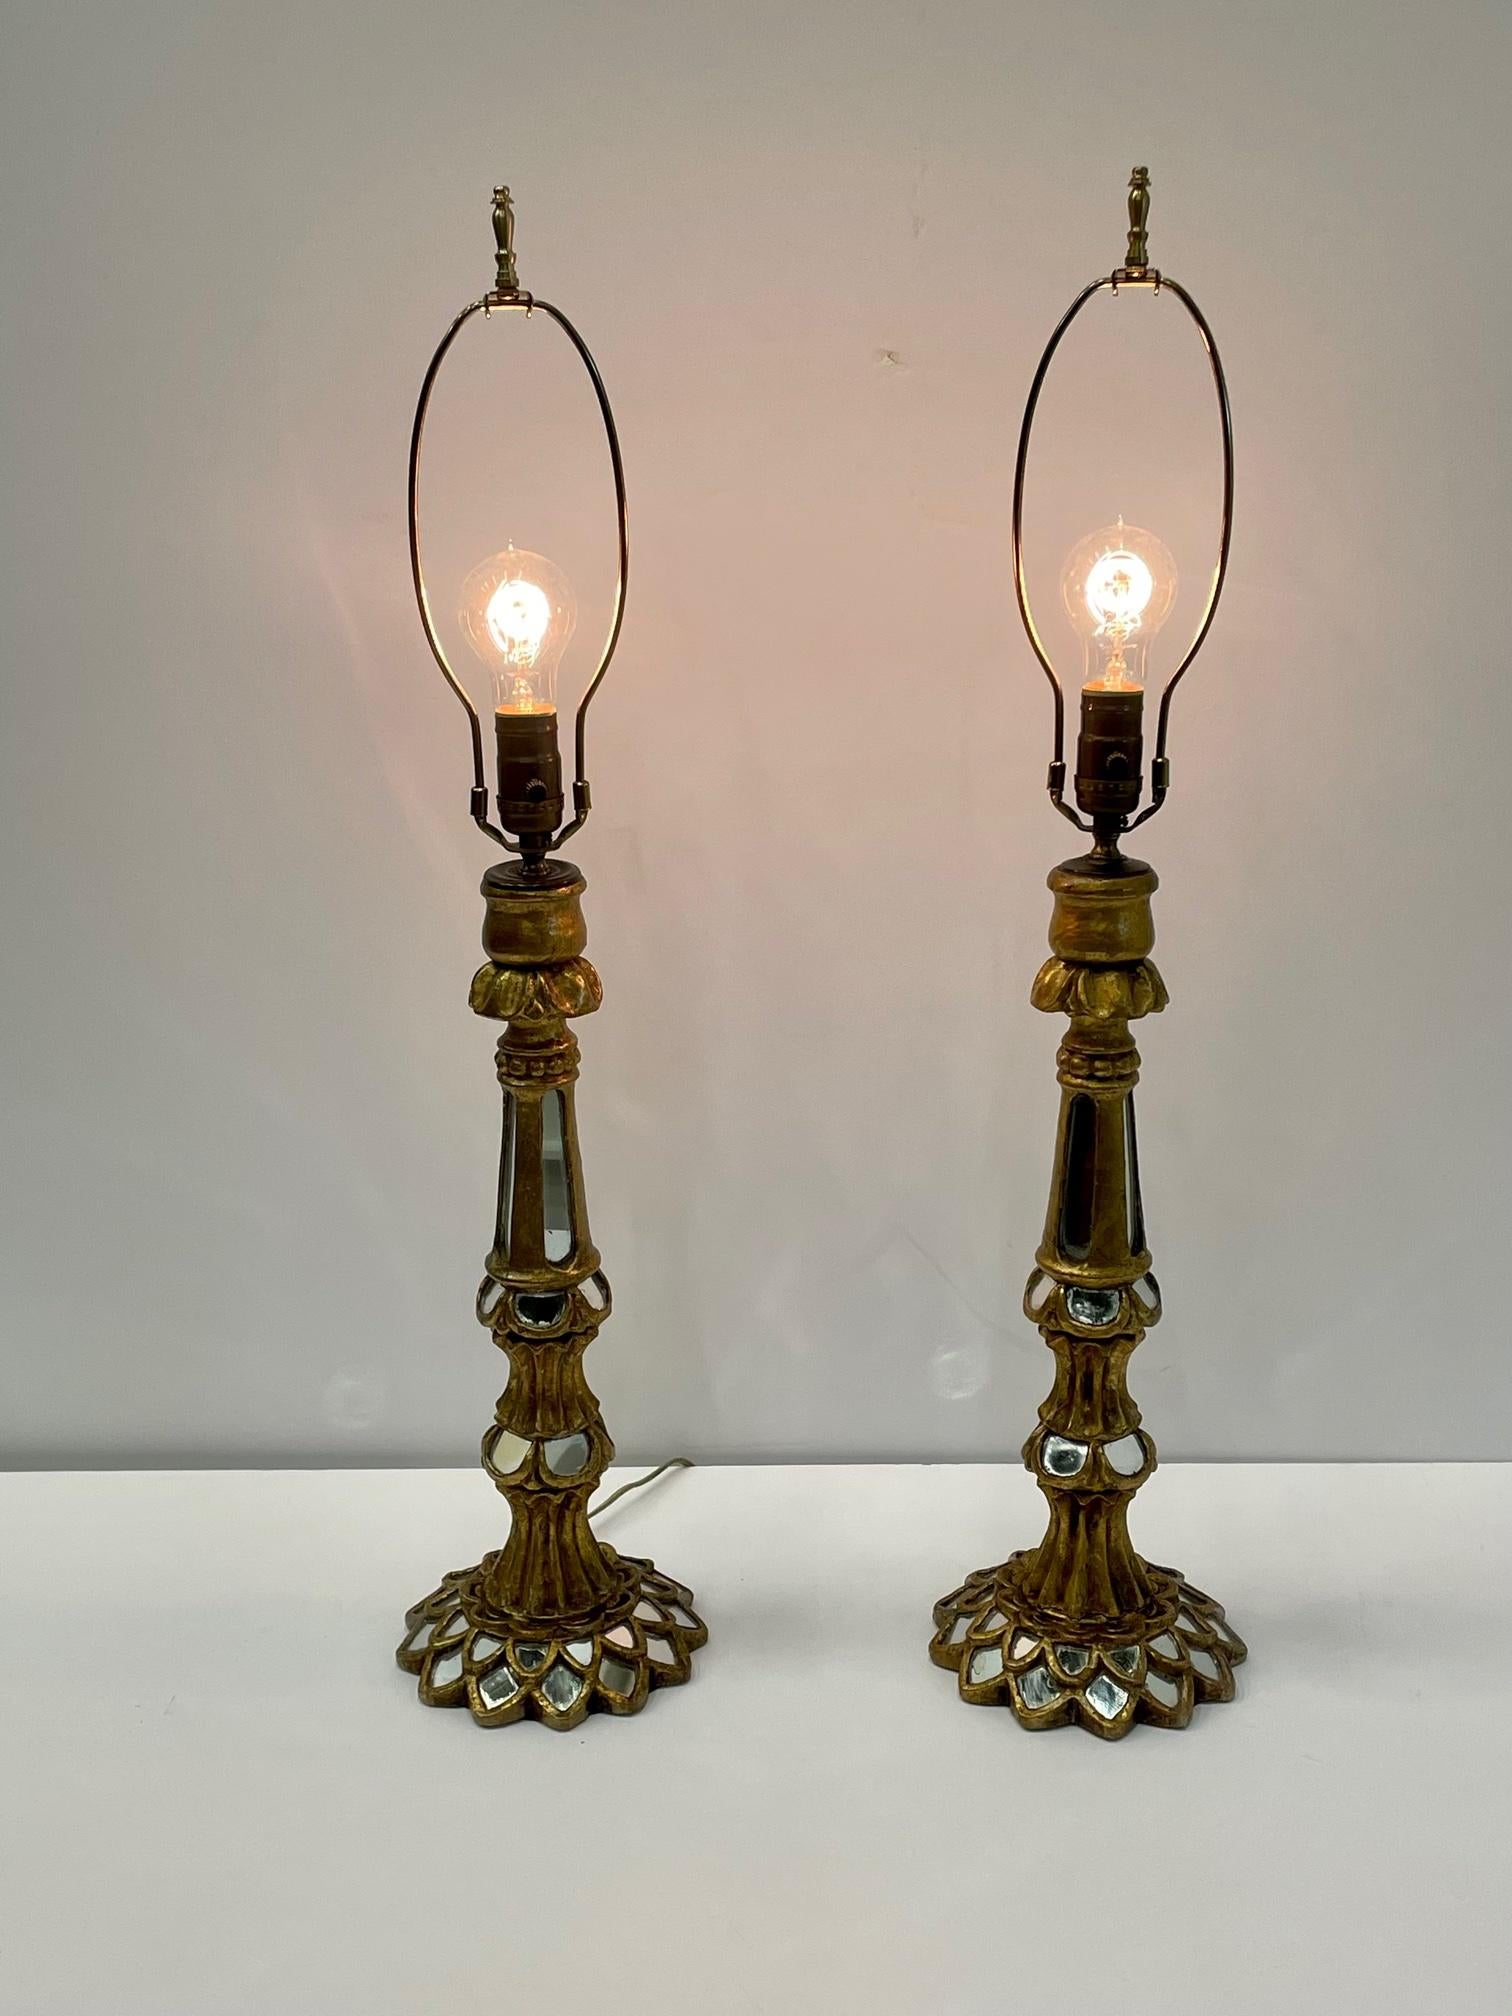 Glistening pair of lovely Italian giltwood table lamps having inset pieces of mirror that add glamour and shine. Shades not included.